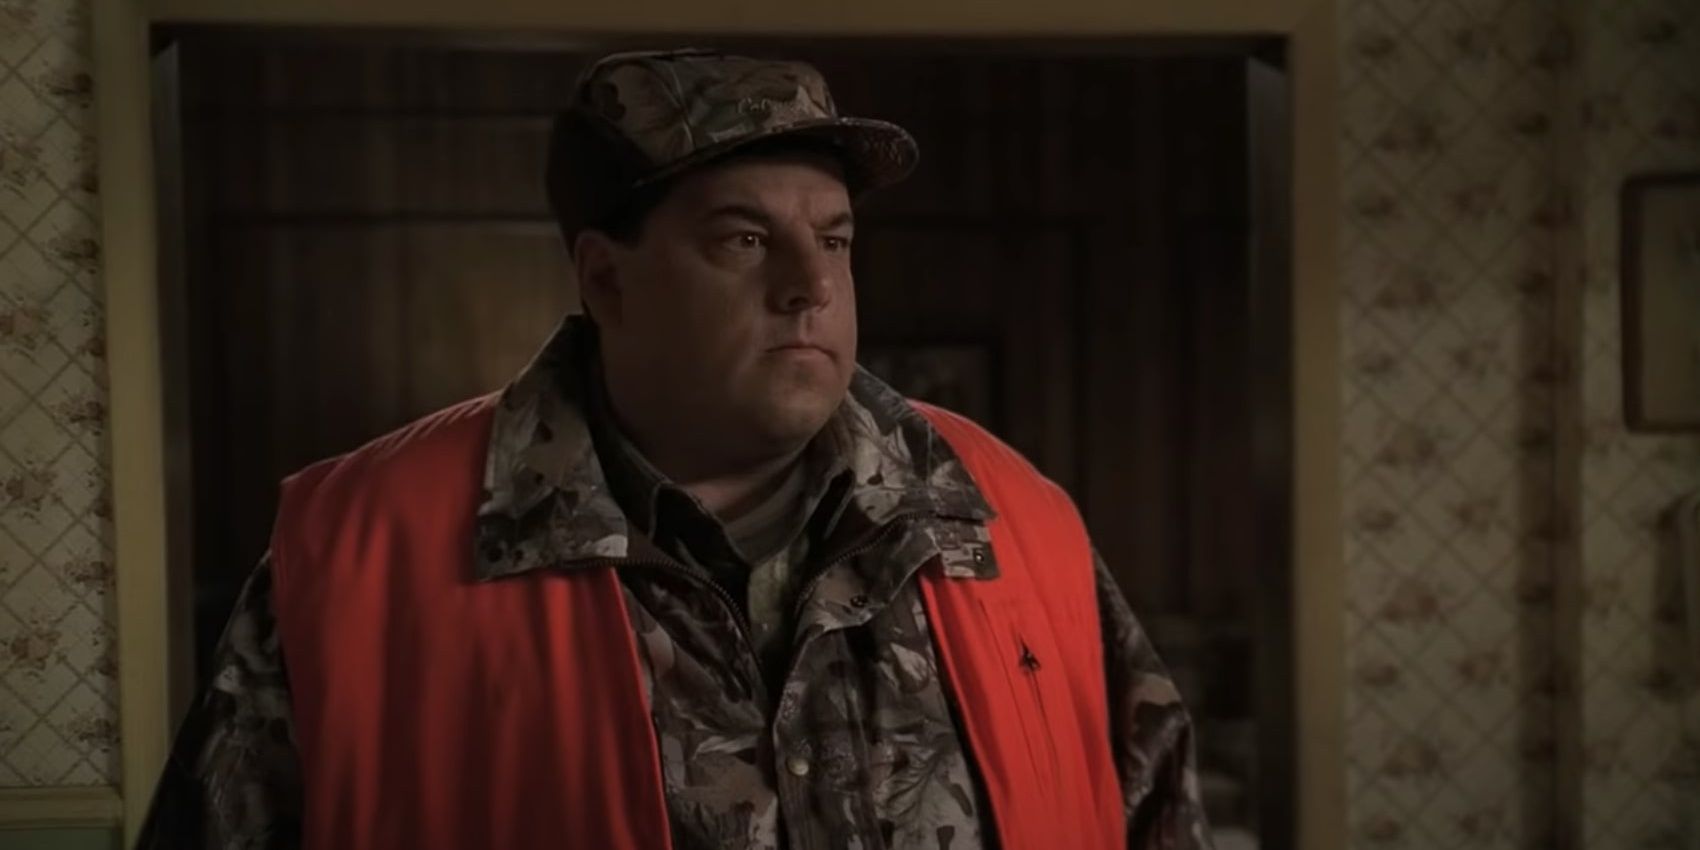 Bobby Bacala wearing an orange vest from The Sopranos